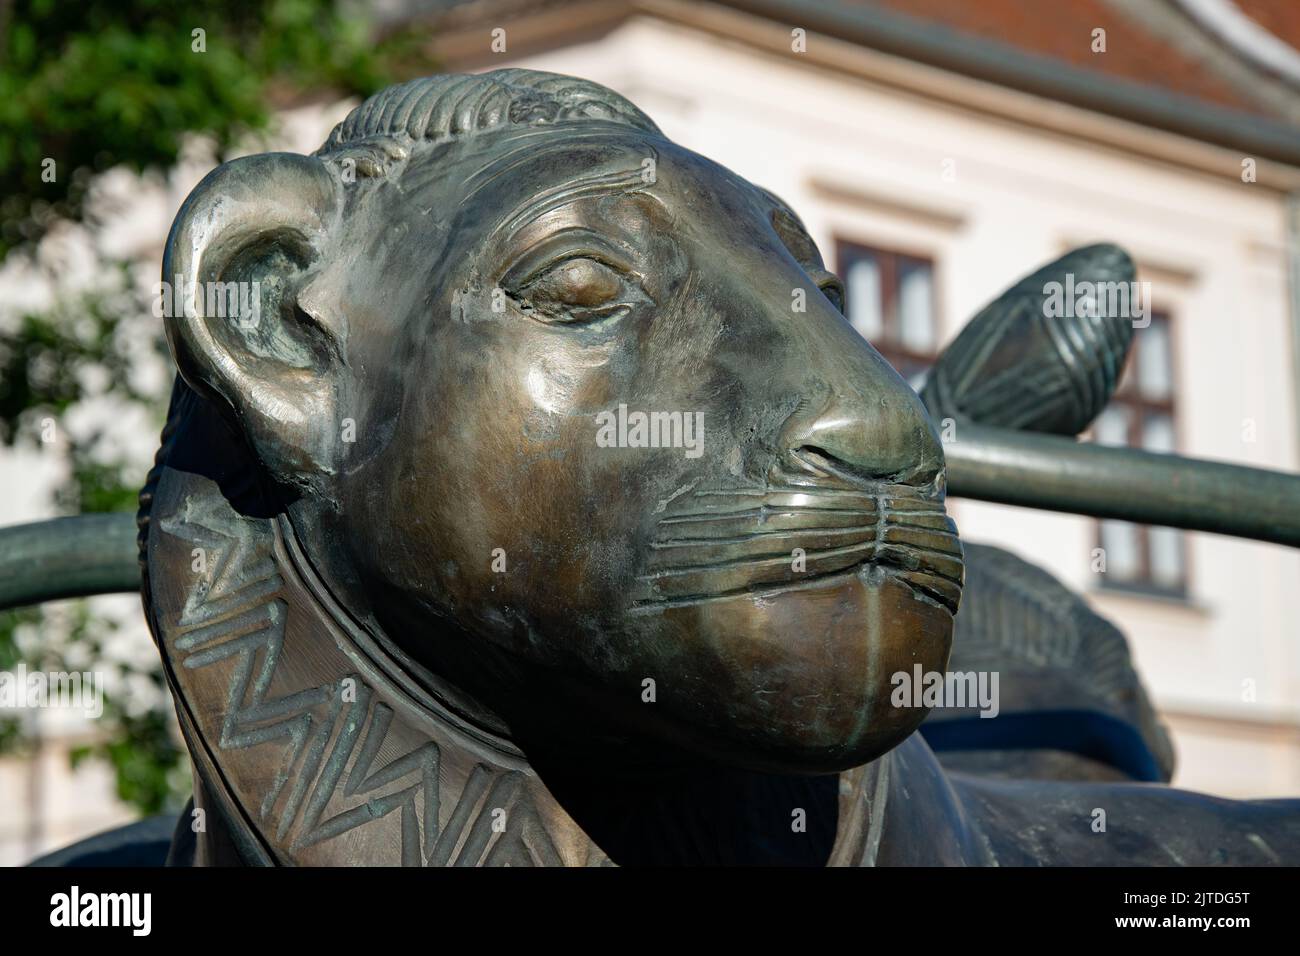 Head and face of bronze lion statue Stock Photo